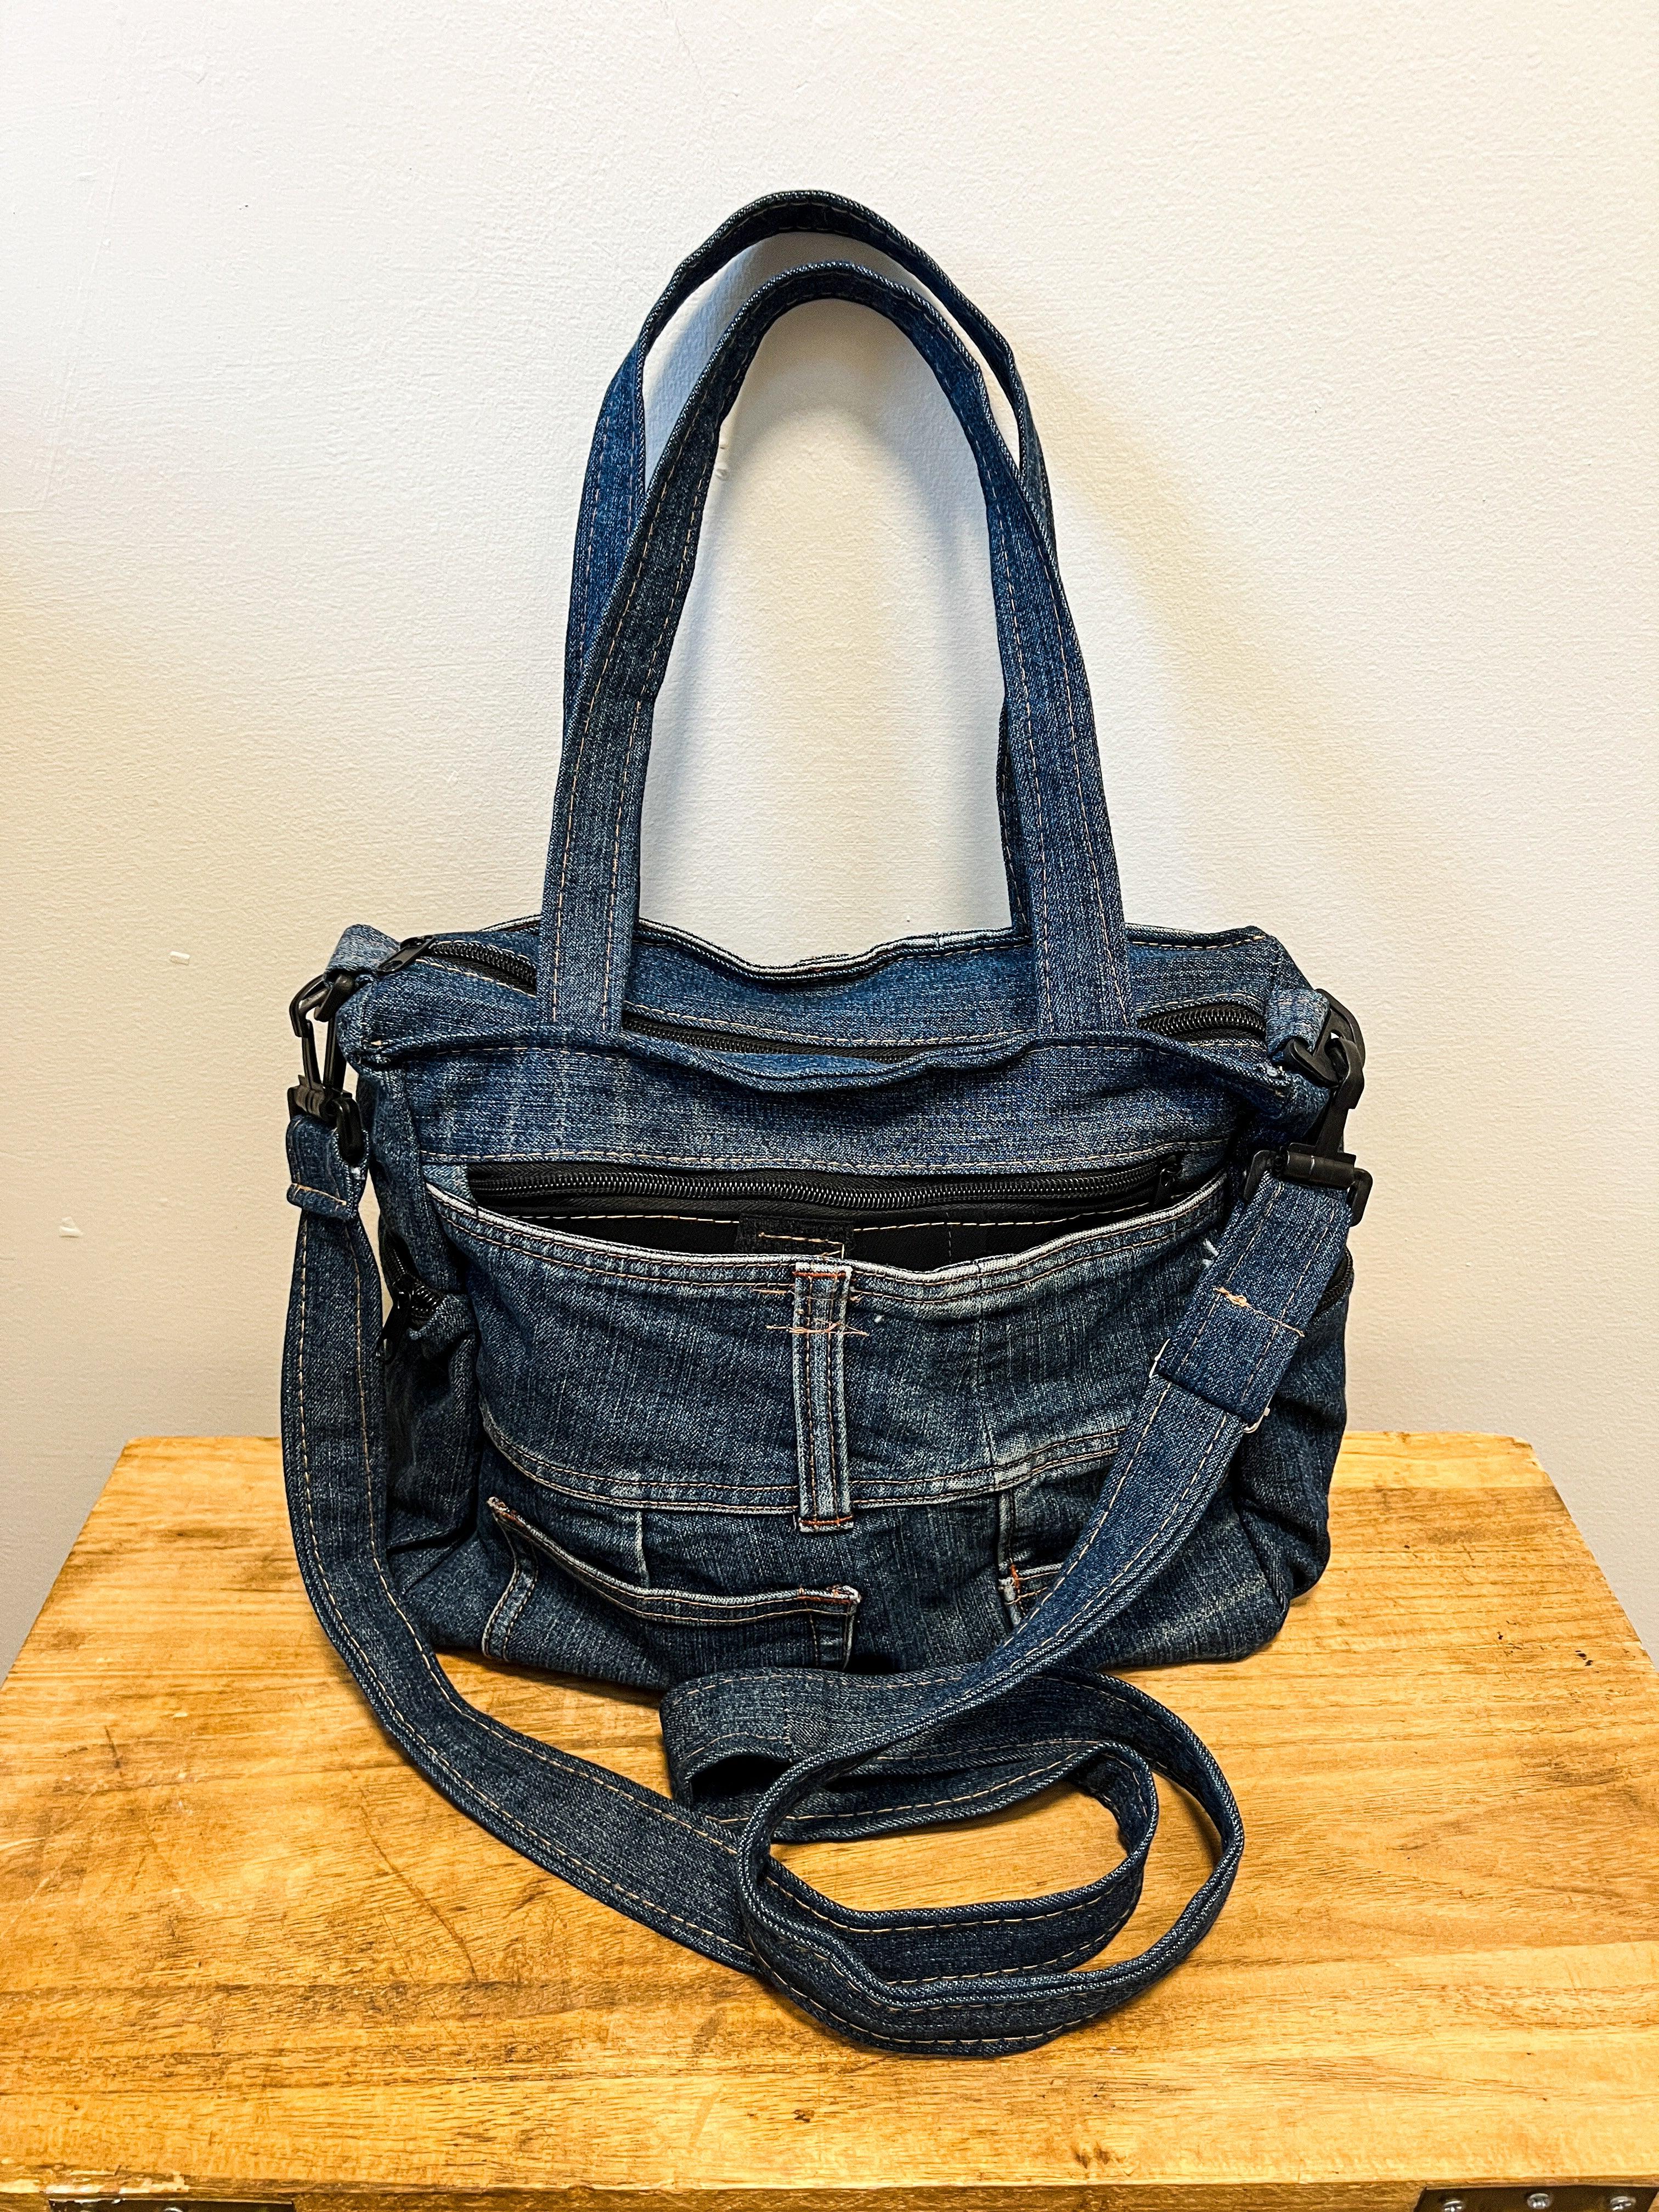 Denim Projects: Upcycle Jeans Ideas | Hearth and Vine